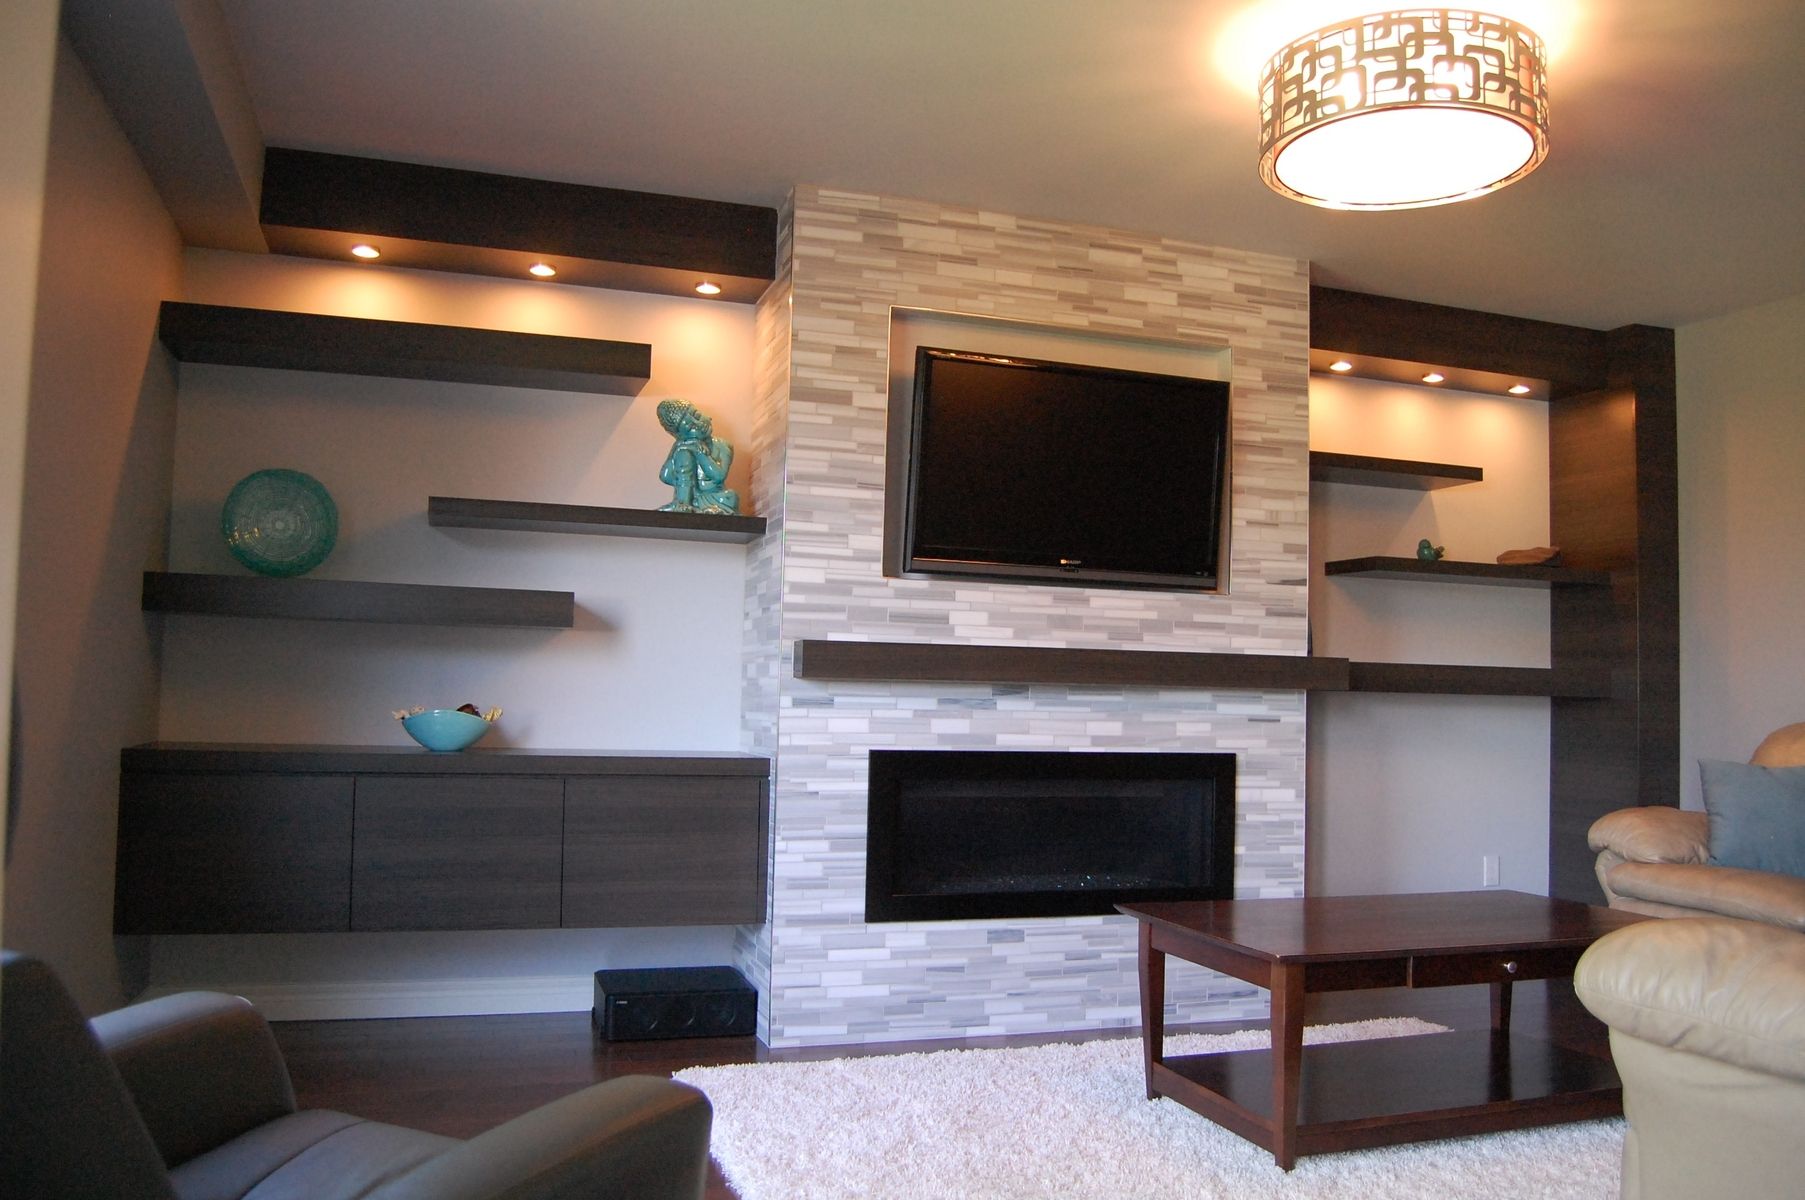 Fireplace On Tv Screen Luxury Custom Modern Wall Unit Made Pletely From A Printed